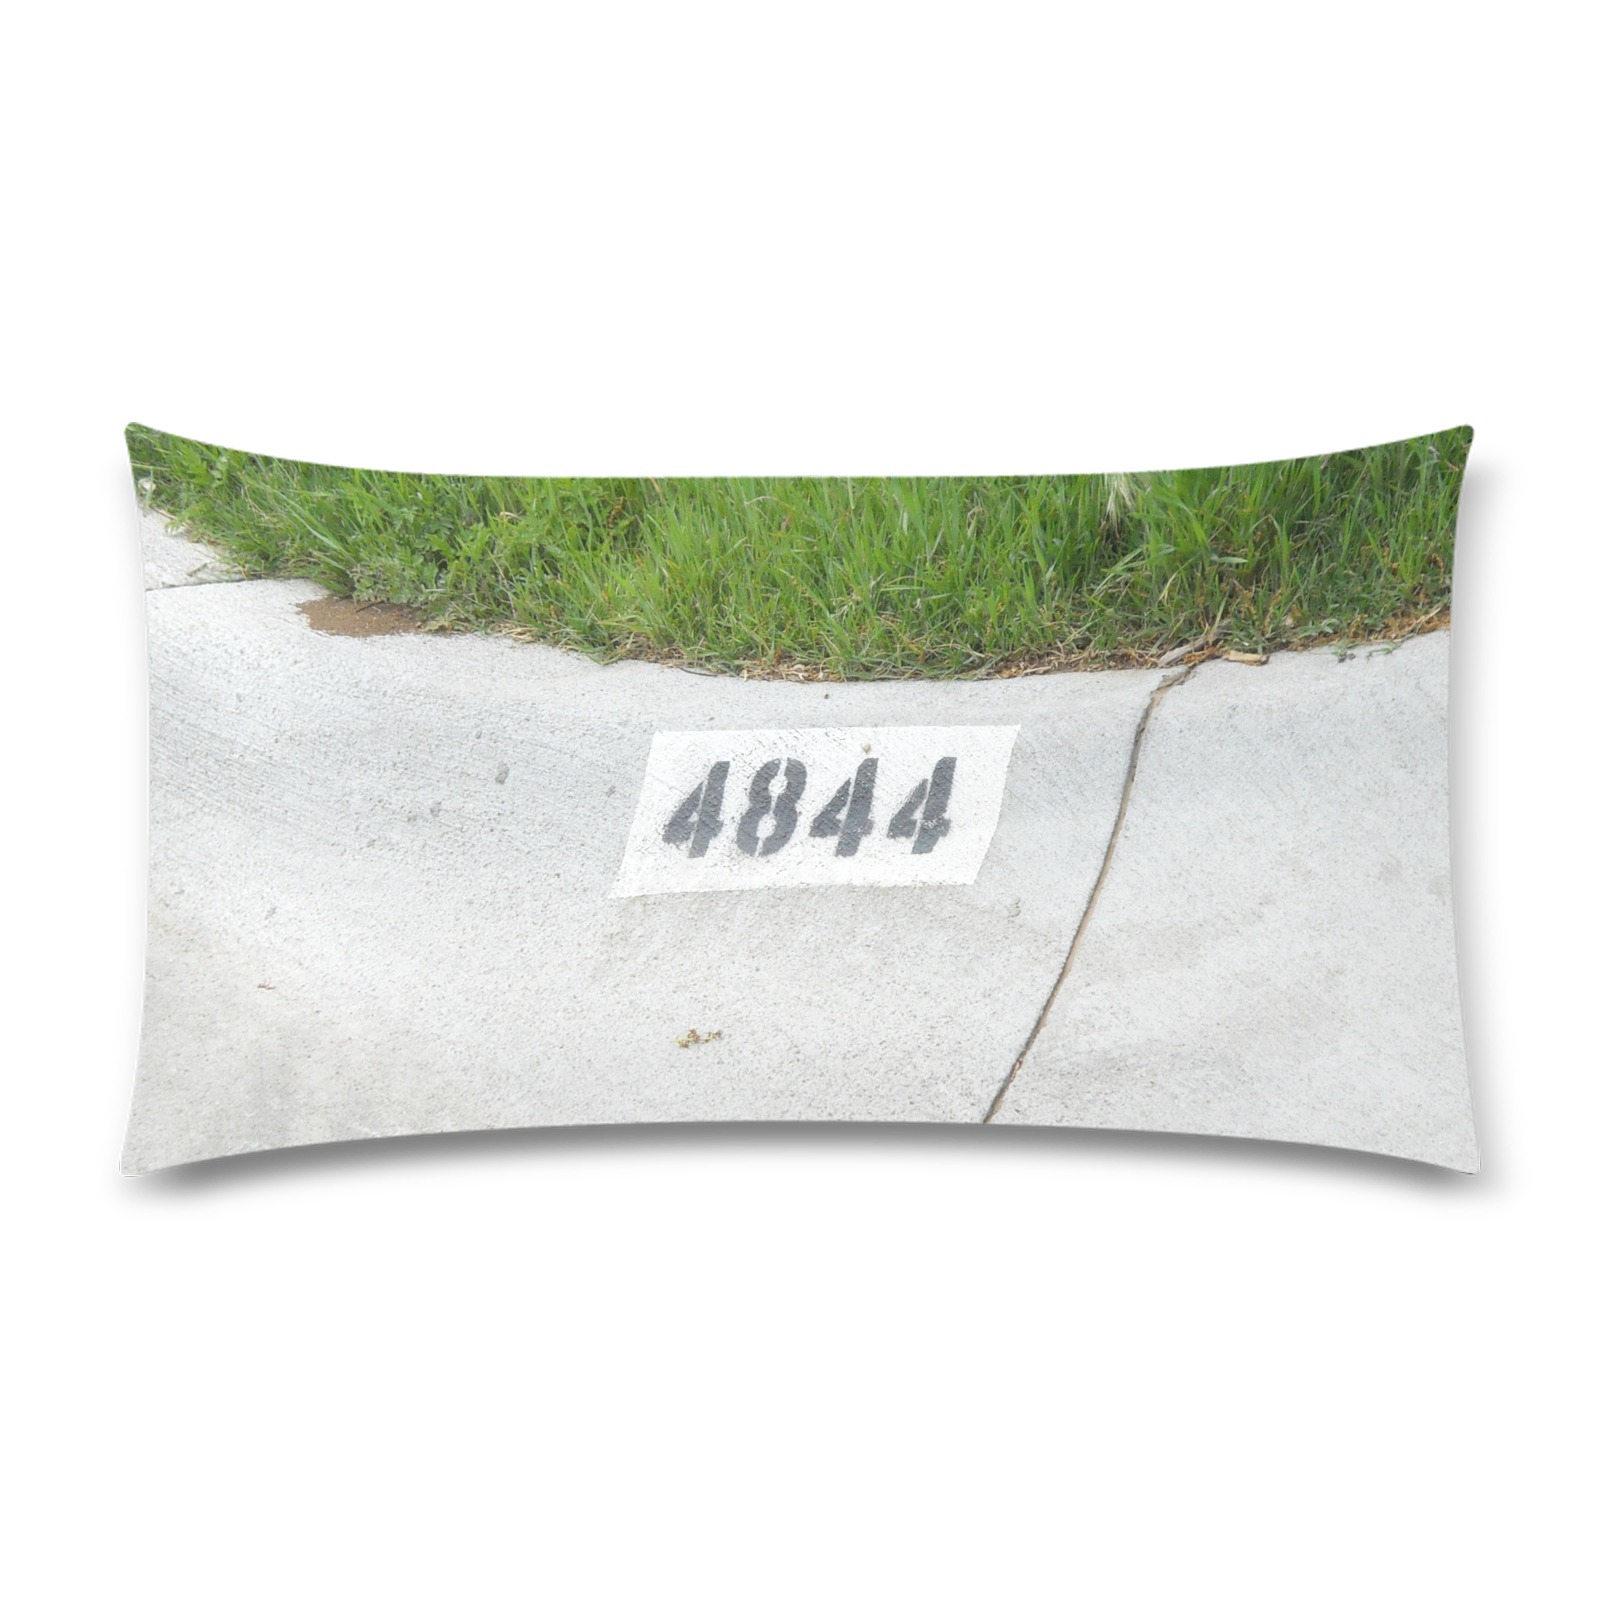 Street Number 4844 Rectangle Pillow Case 20"x36"(Twin Sides)